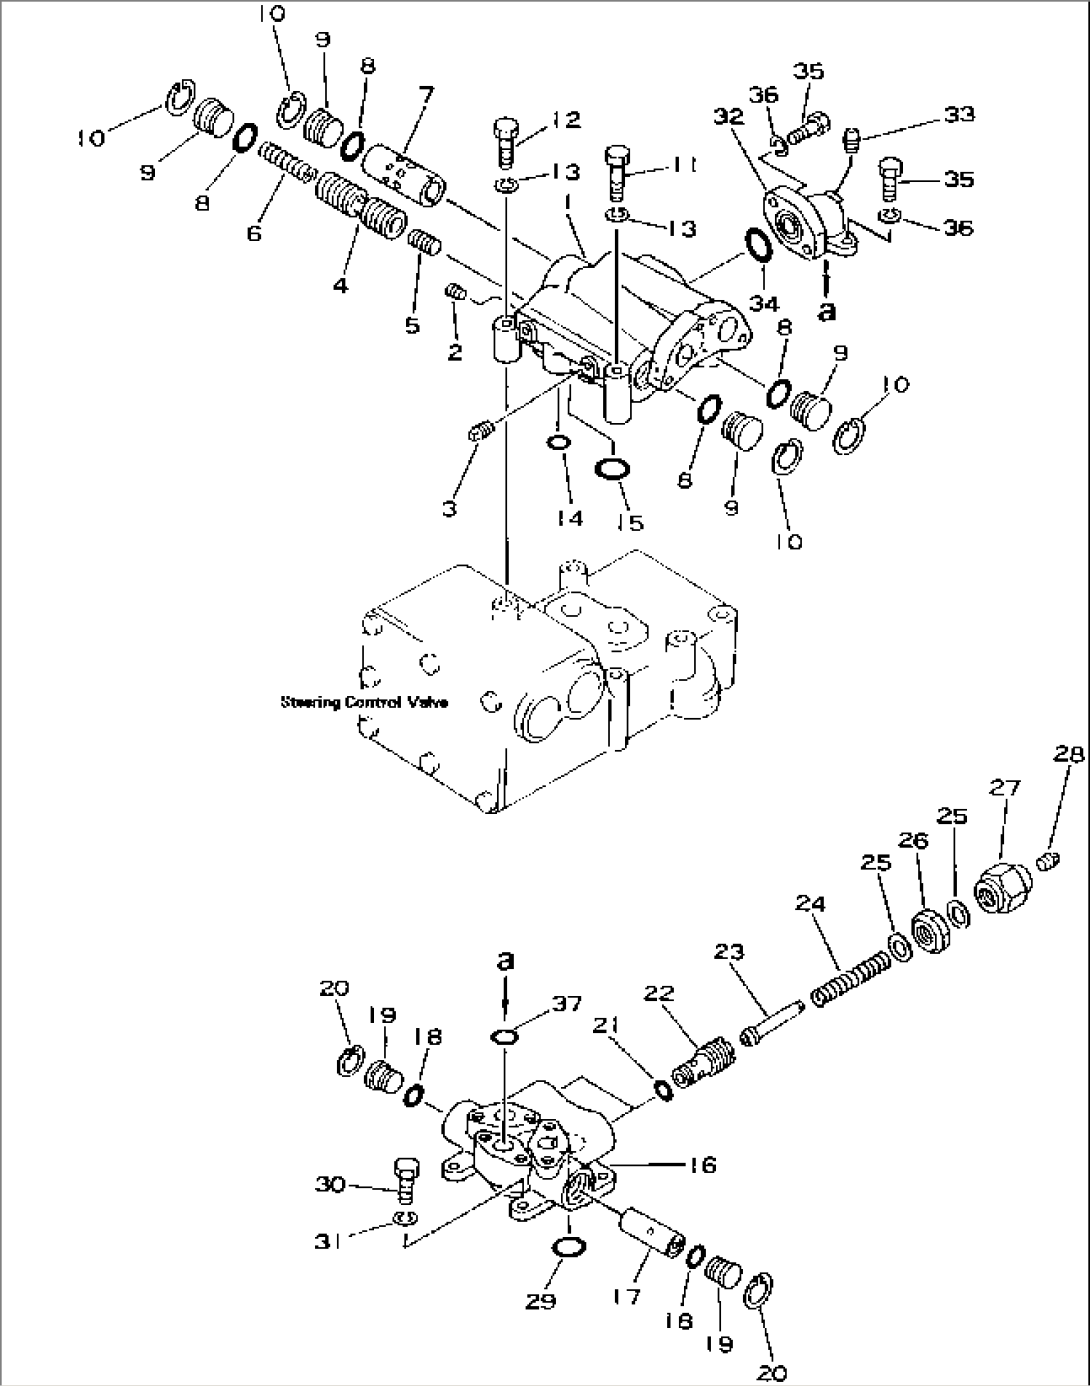 MAIN RELIEF VALVE AND SAFETY VALVE